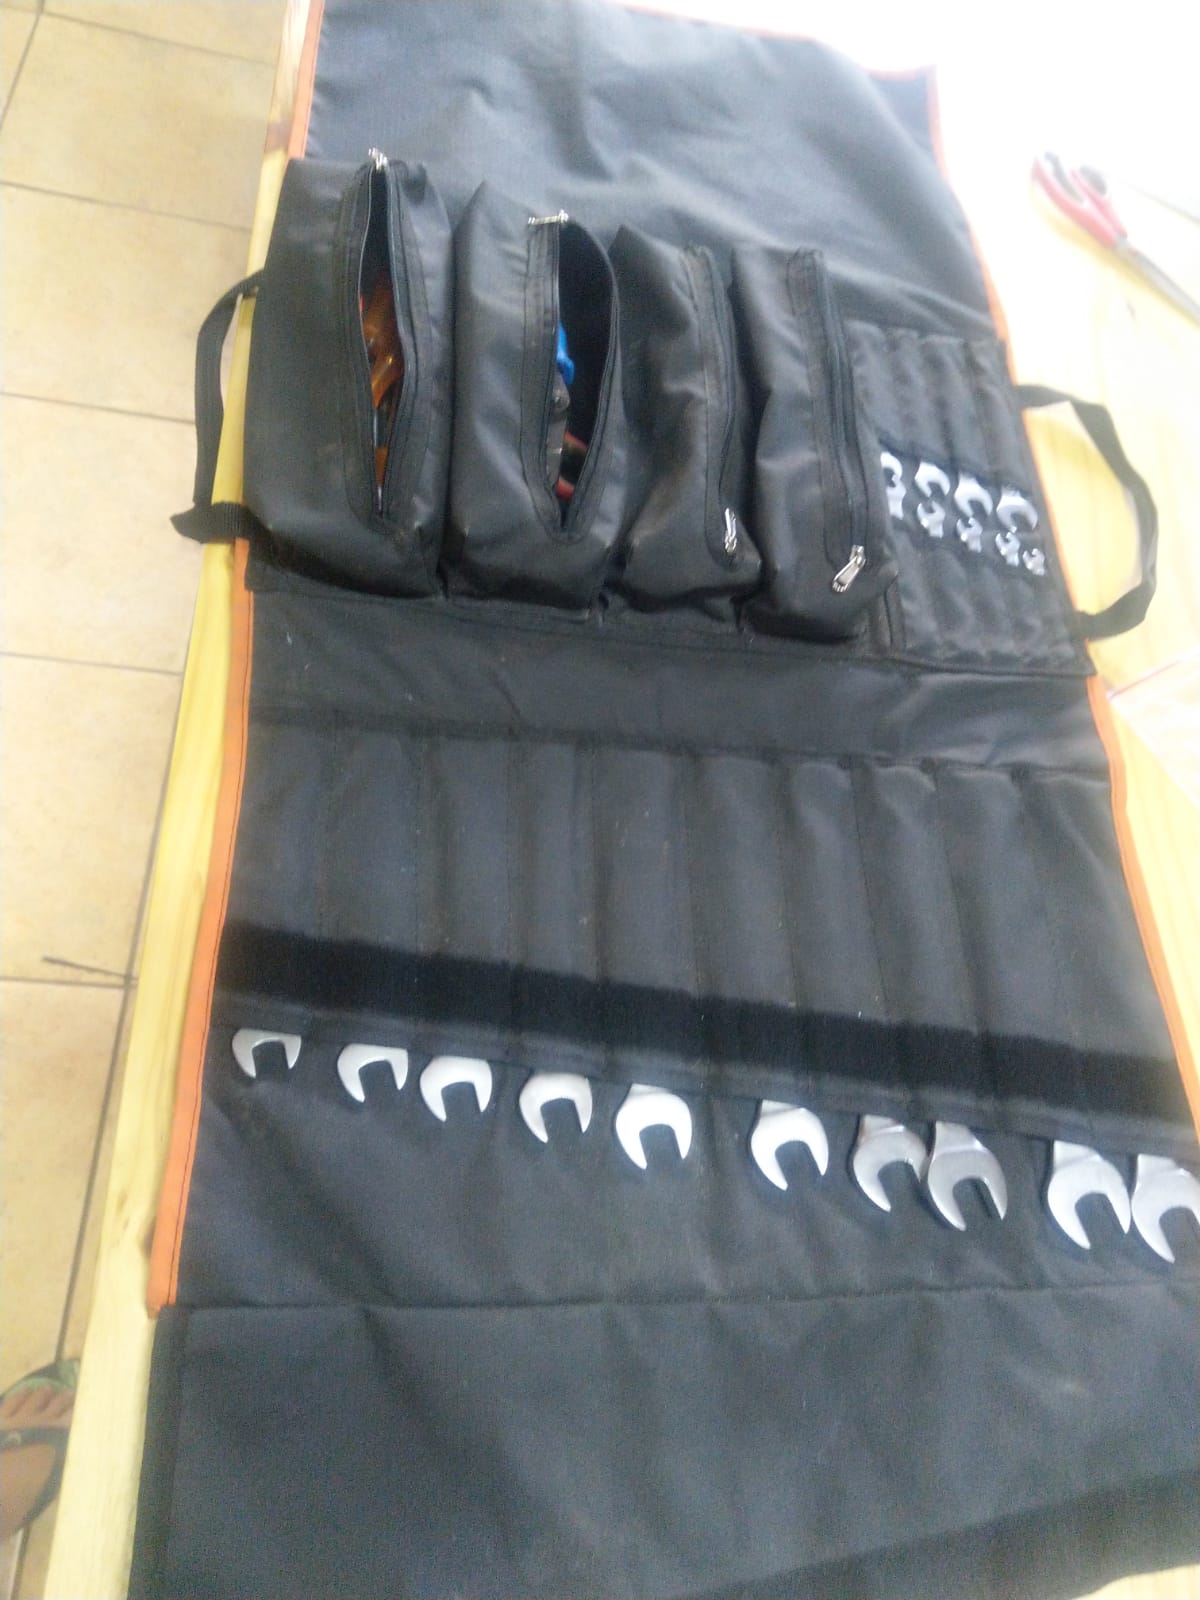 Large roll up tool bag